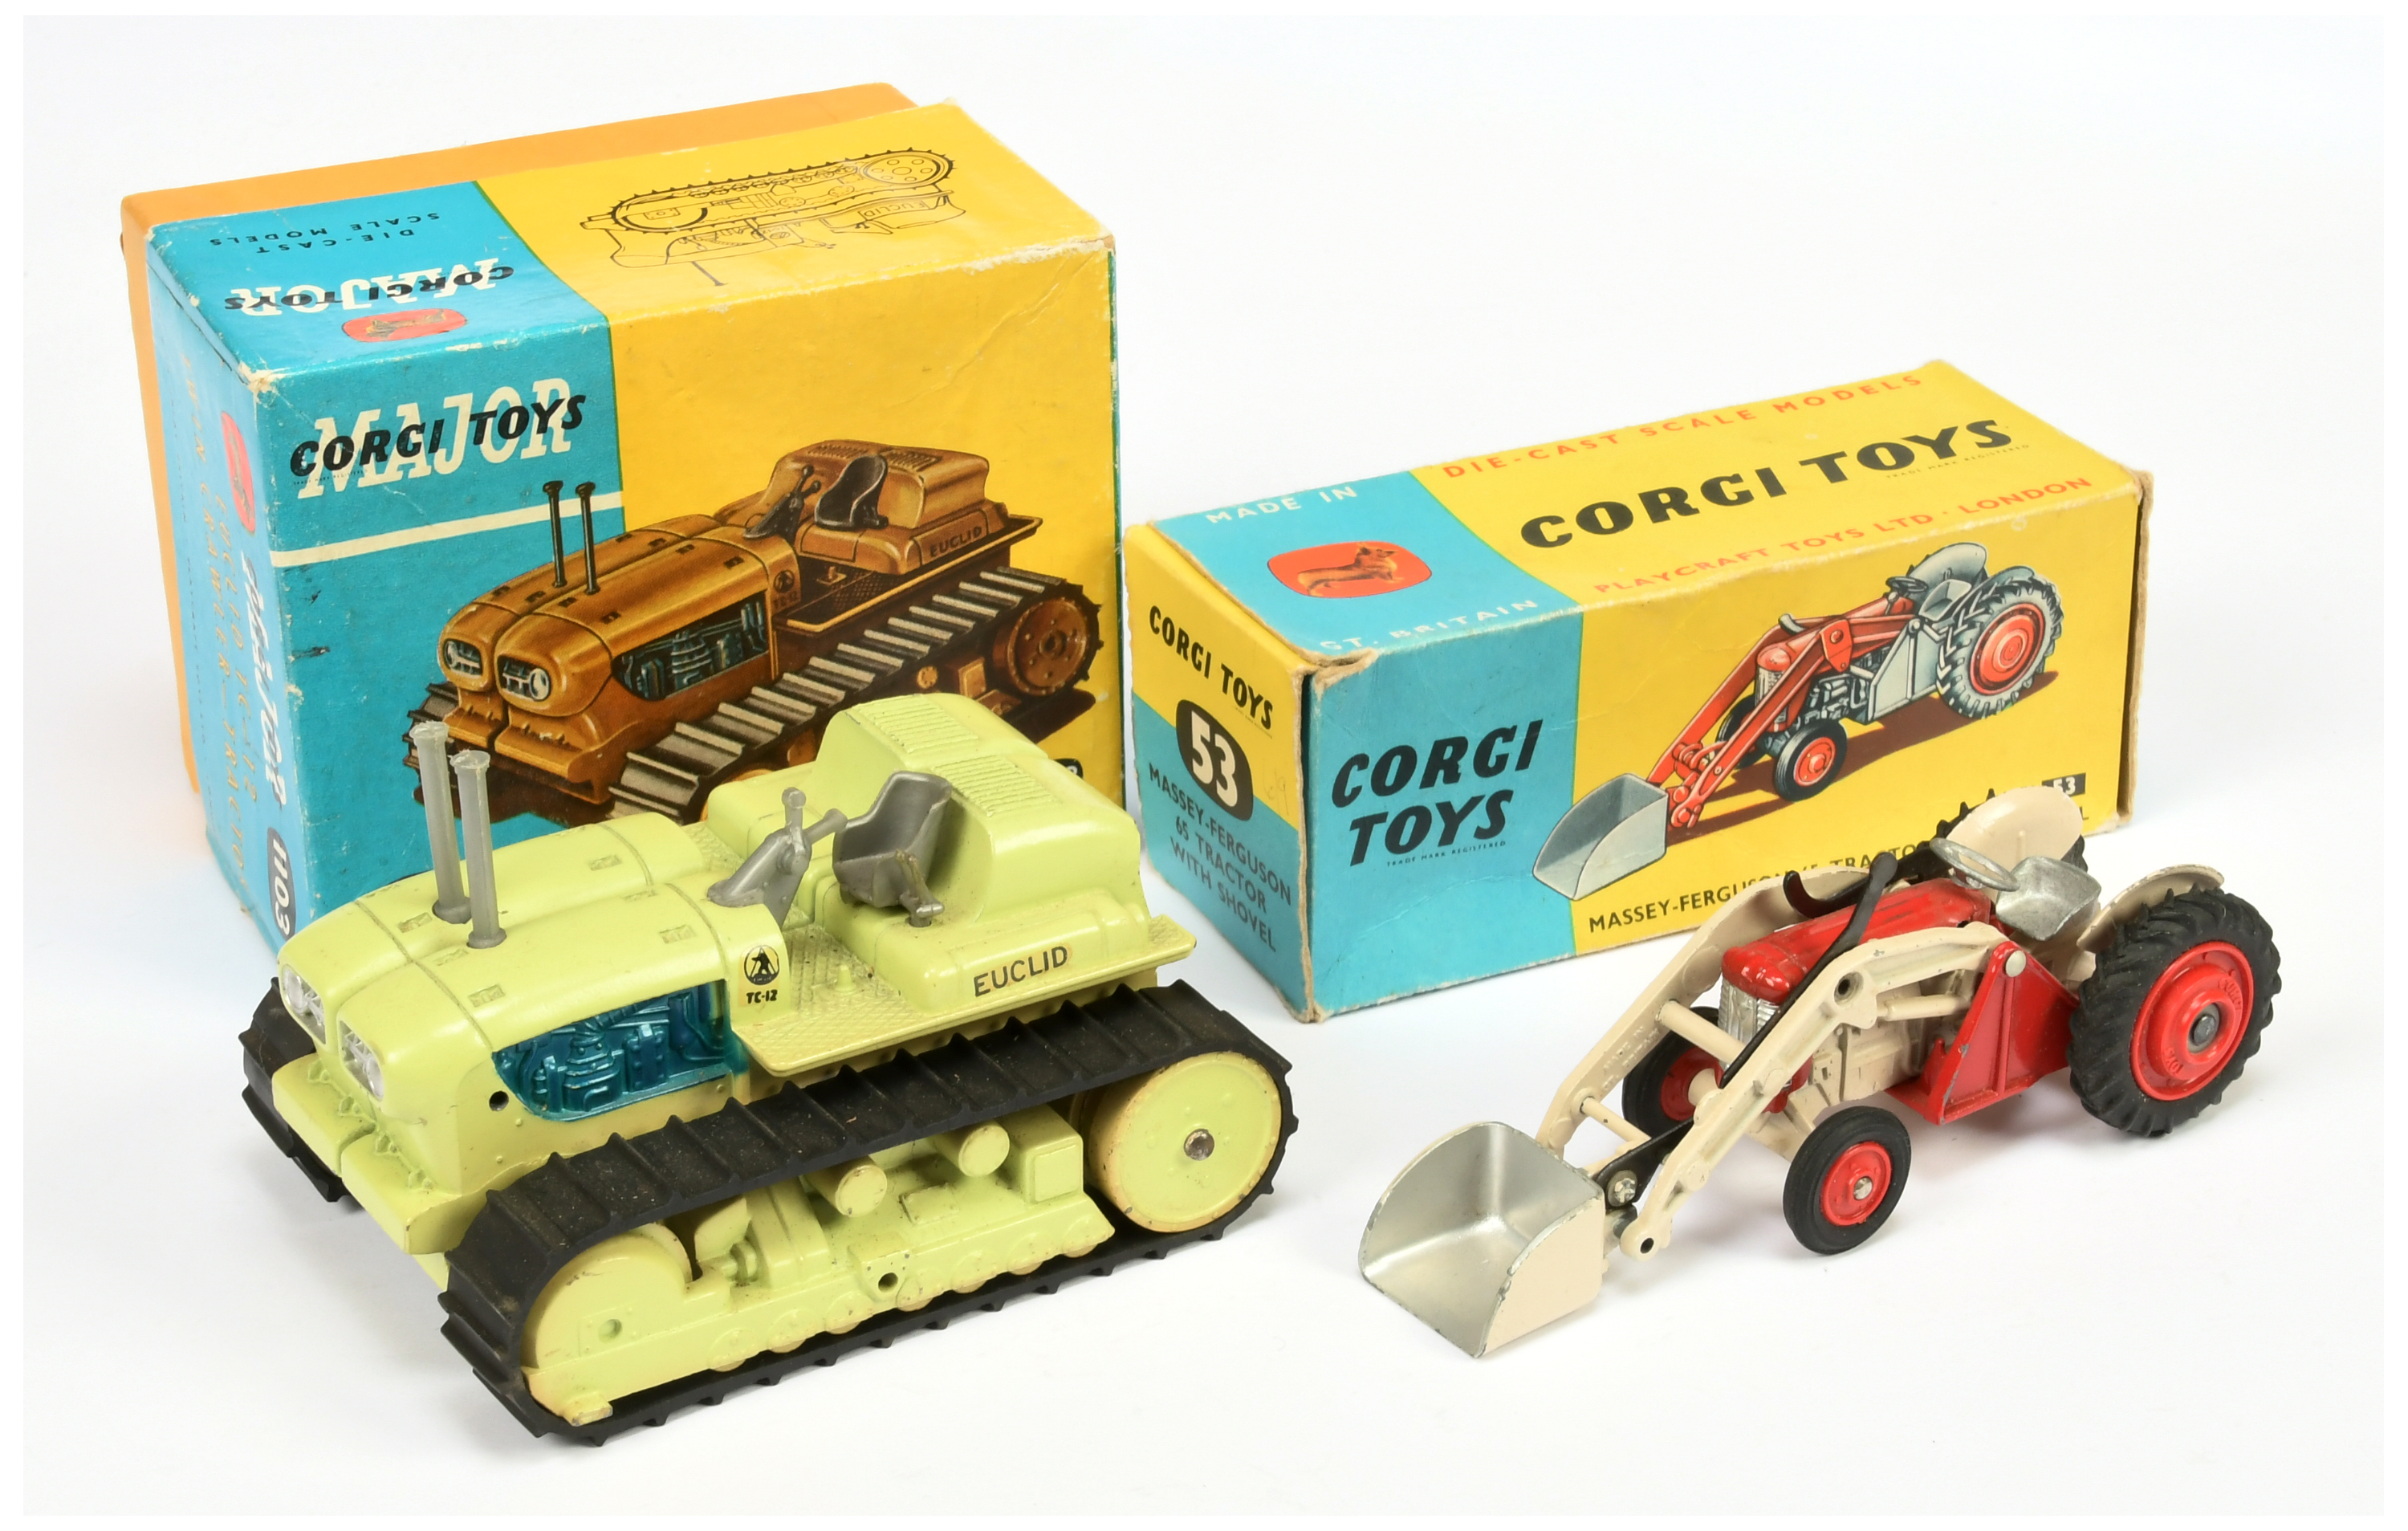 Corgi Toys 53 Massey Ferguson 65 Tractor With Shovel - Red including hubs, Cream, silver and 1108...